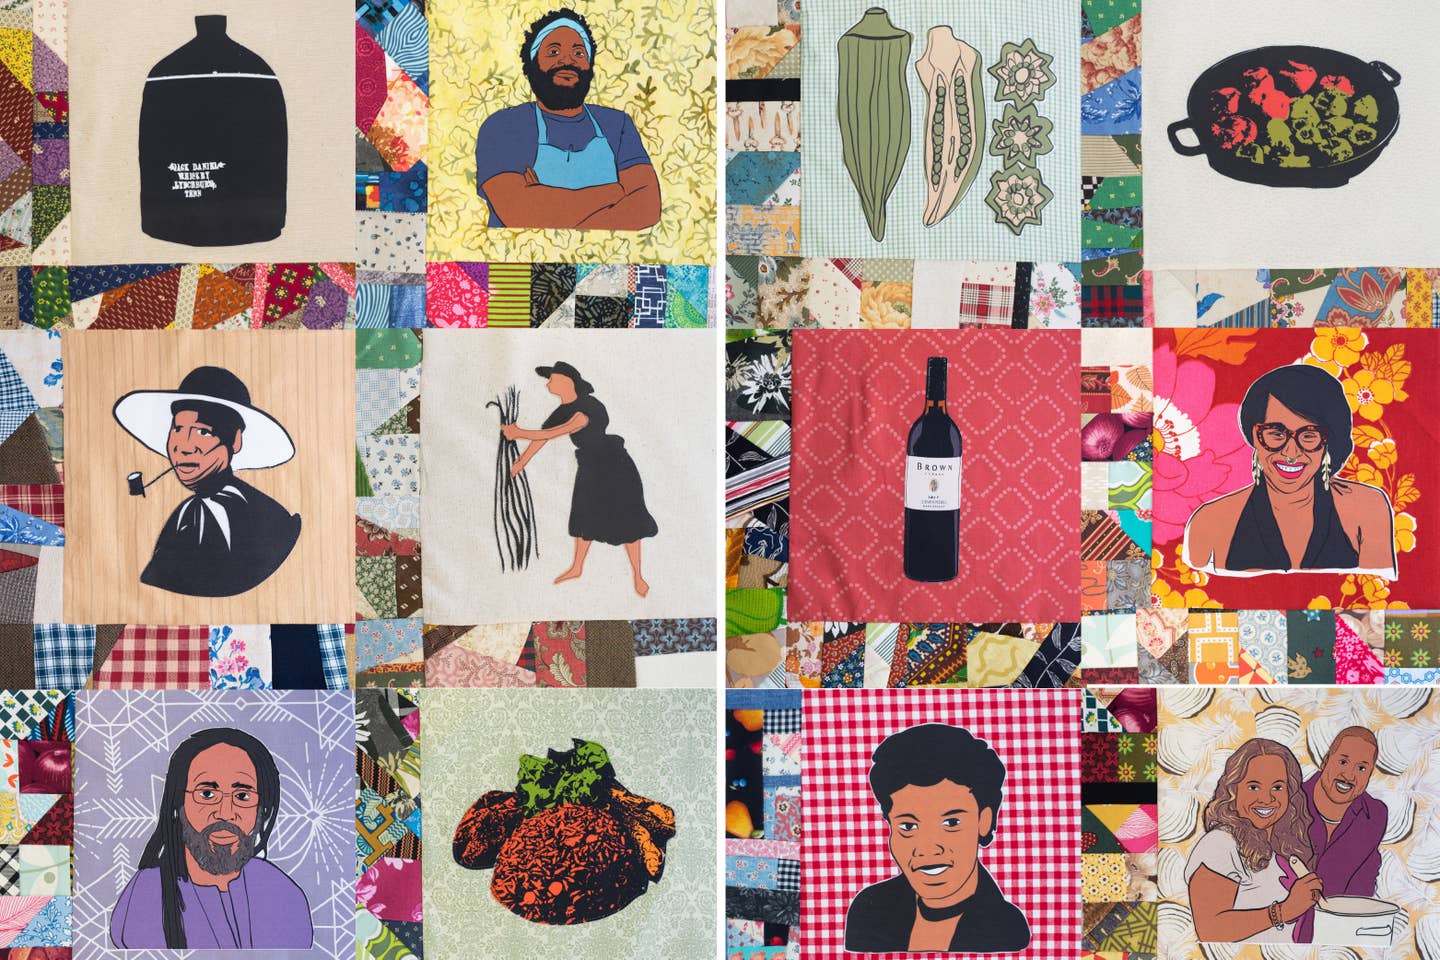 A New MoFaD Exhibit Celebrates African Americans’ Impact on the Nation’s Foodways